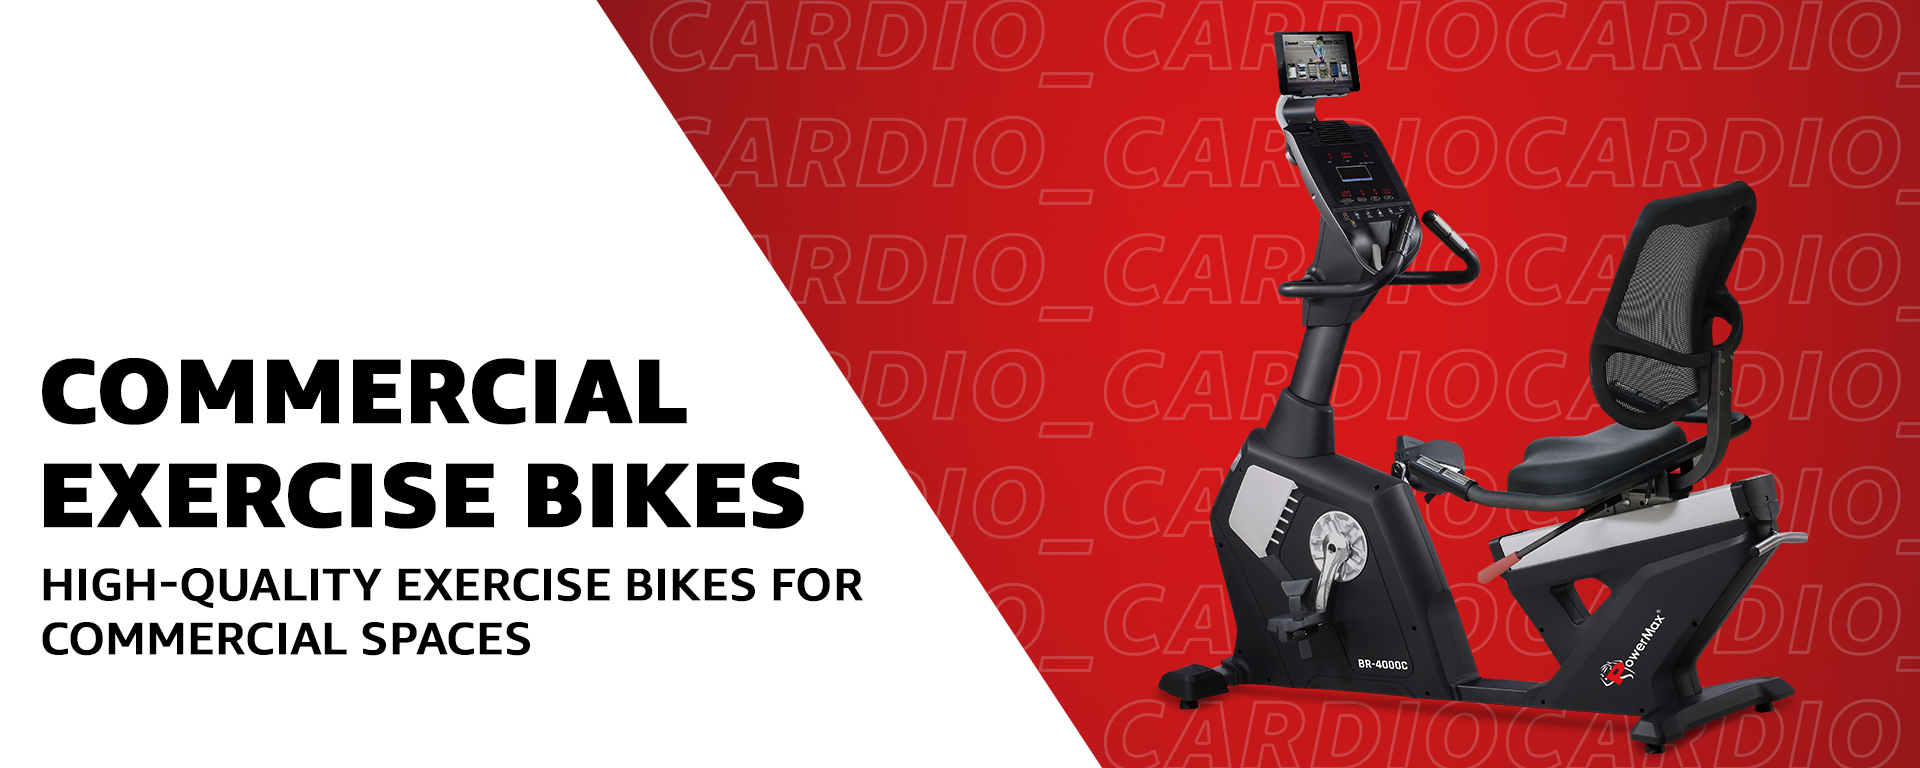 use > cardio > commercial exercise bike